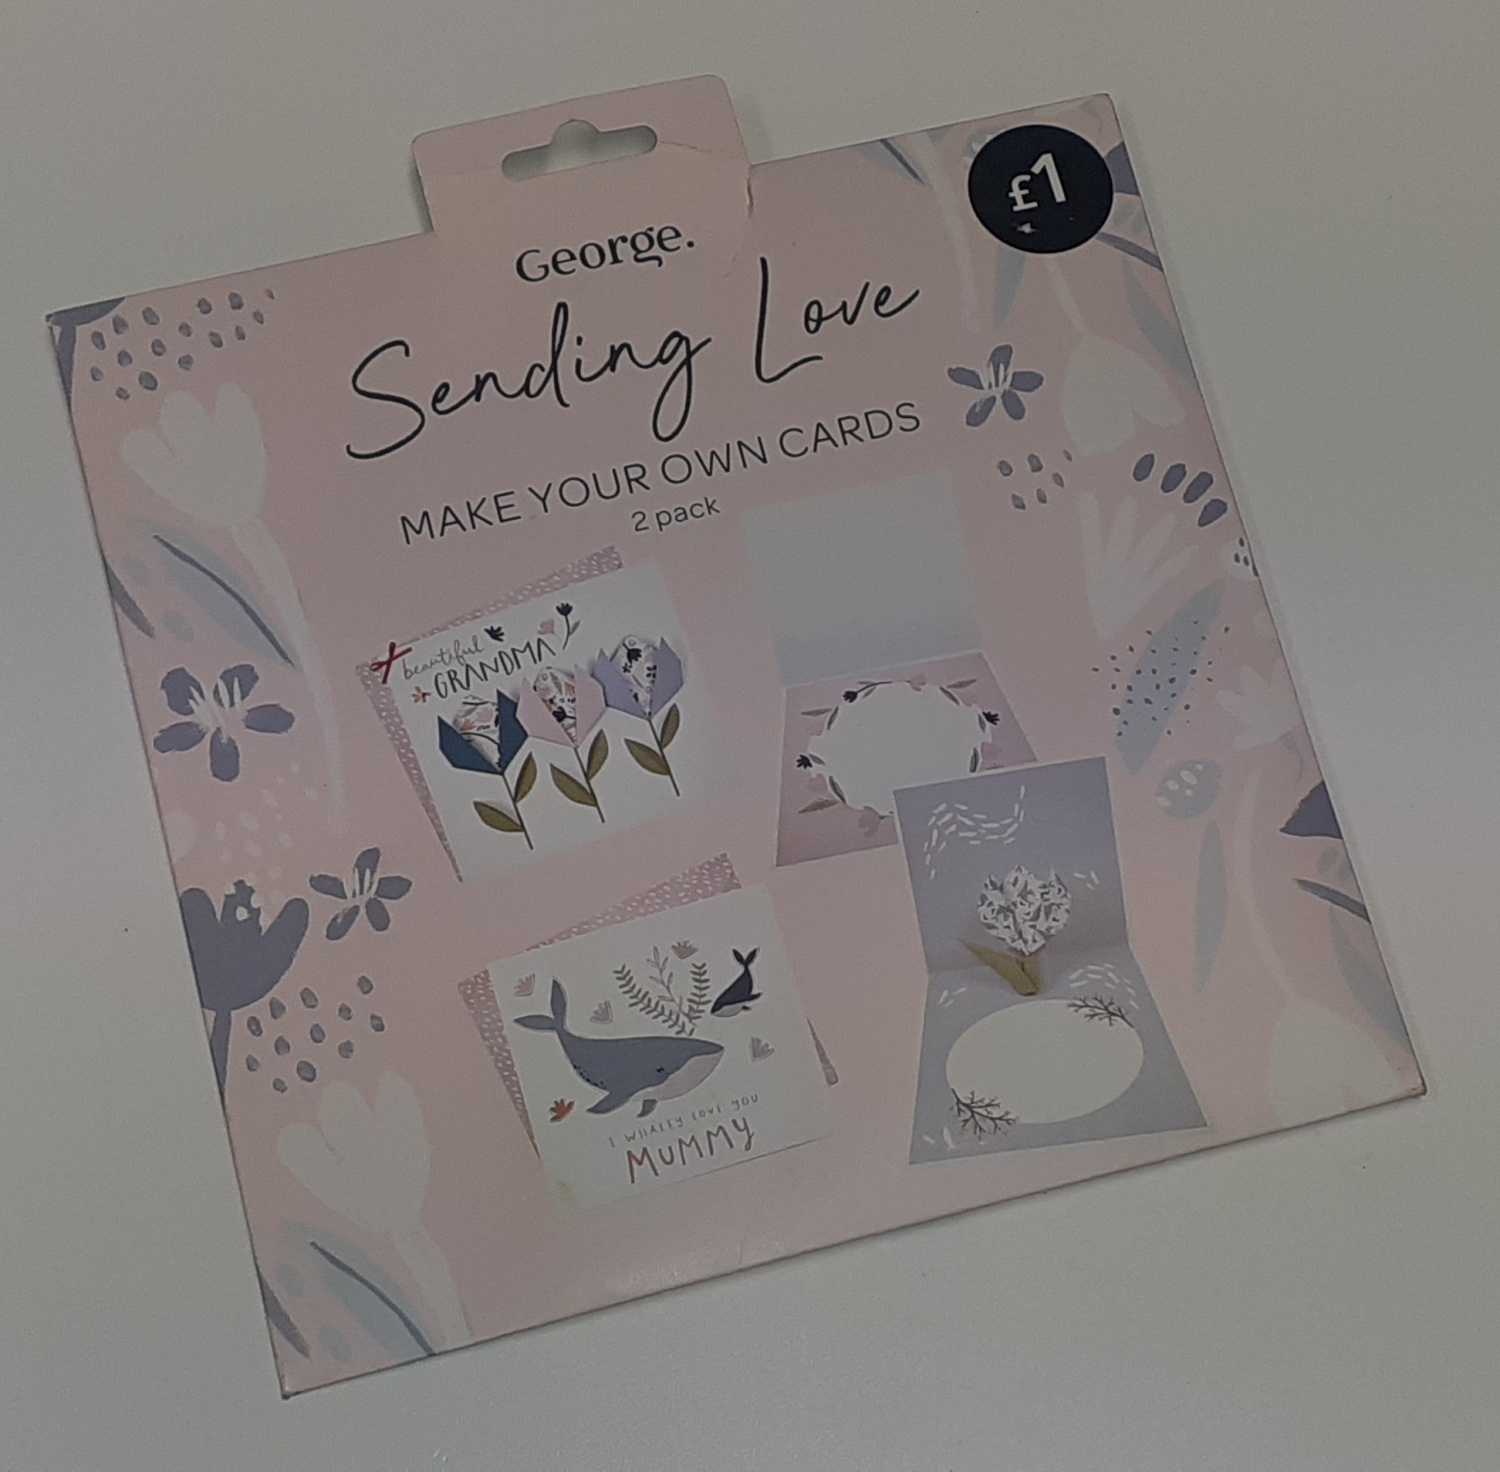 George Sending Love Make Your Own Cards 2 Pack RRP 1 CLEARANCE XL 99p